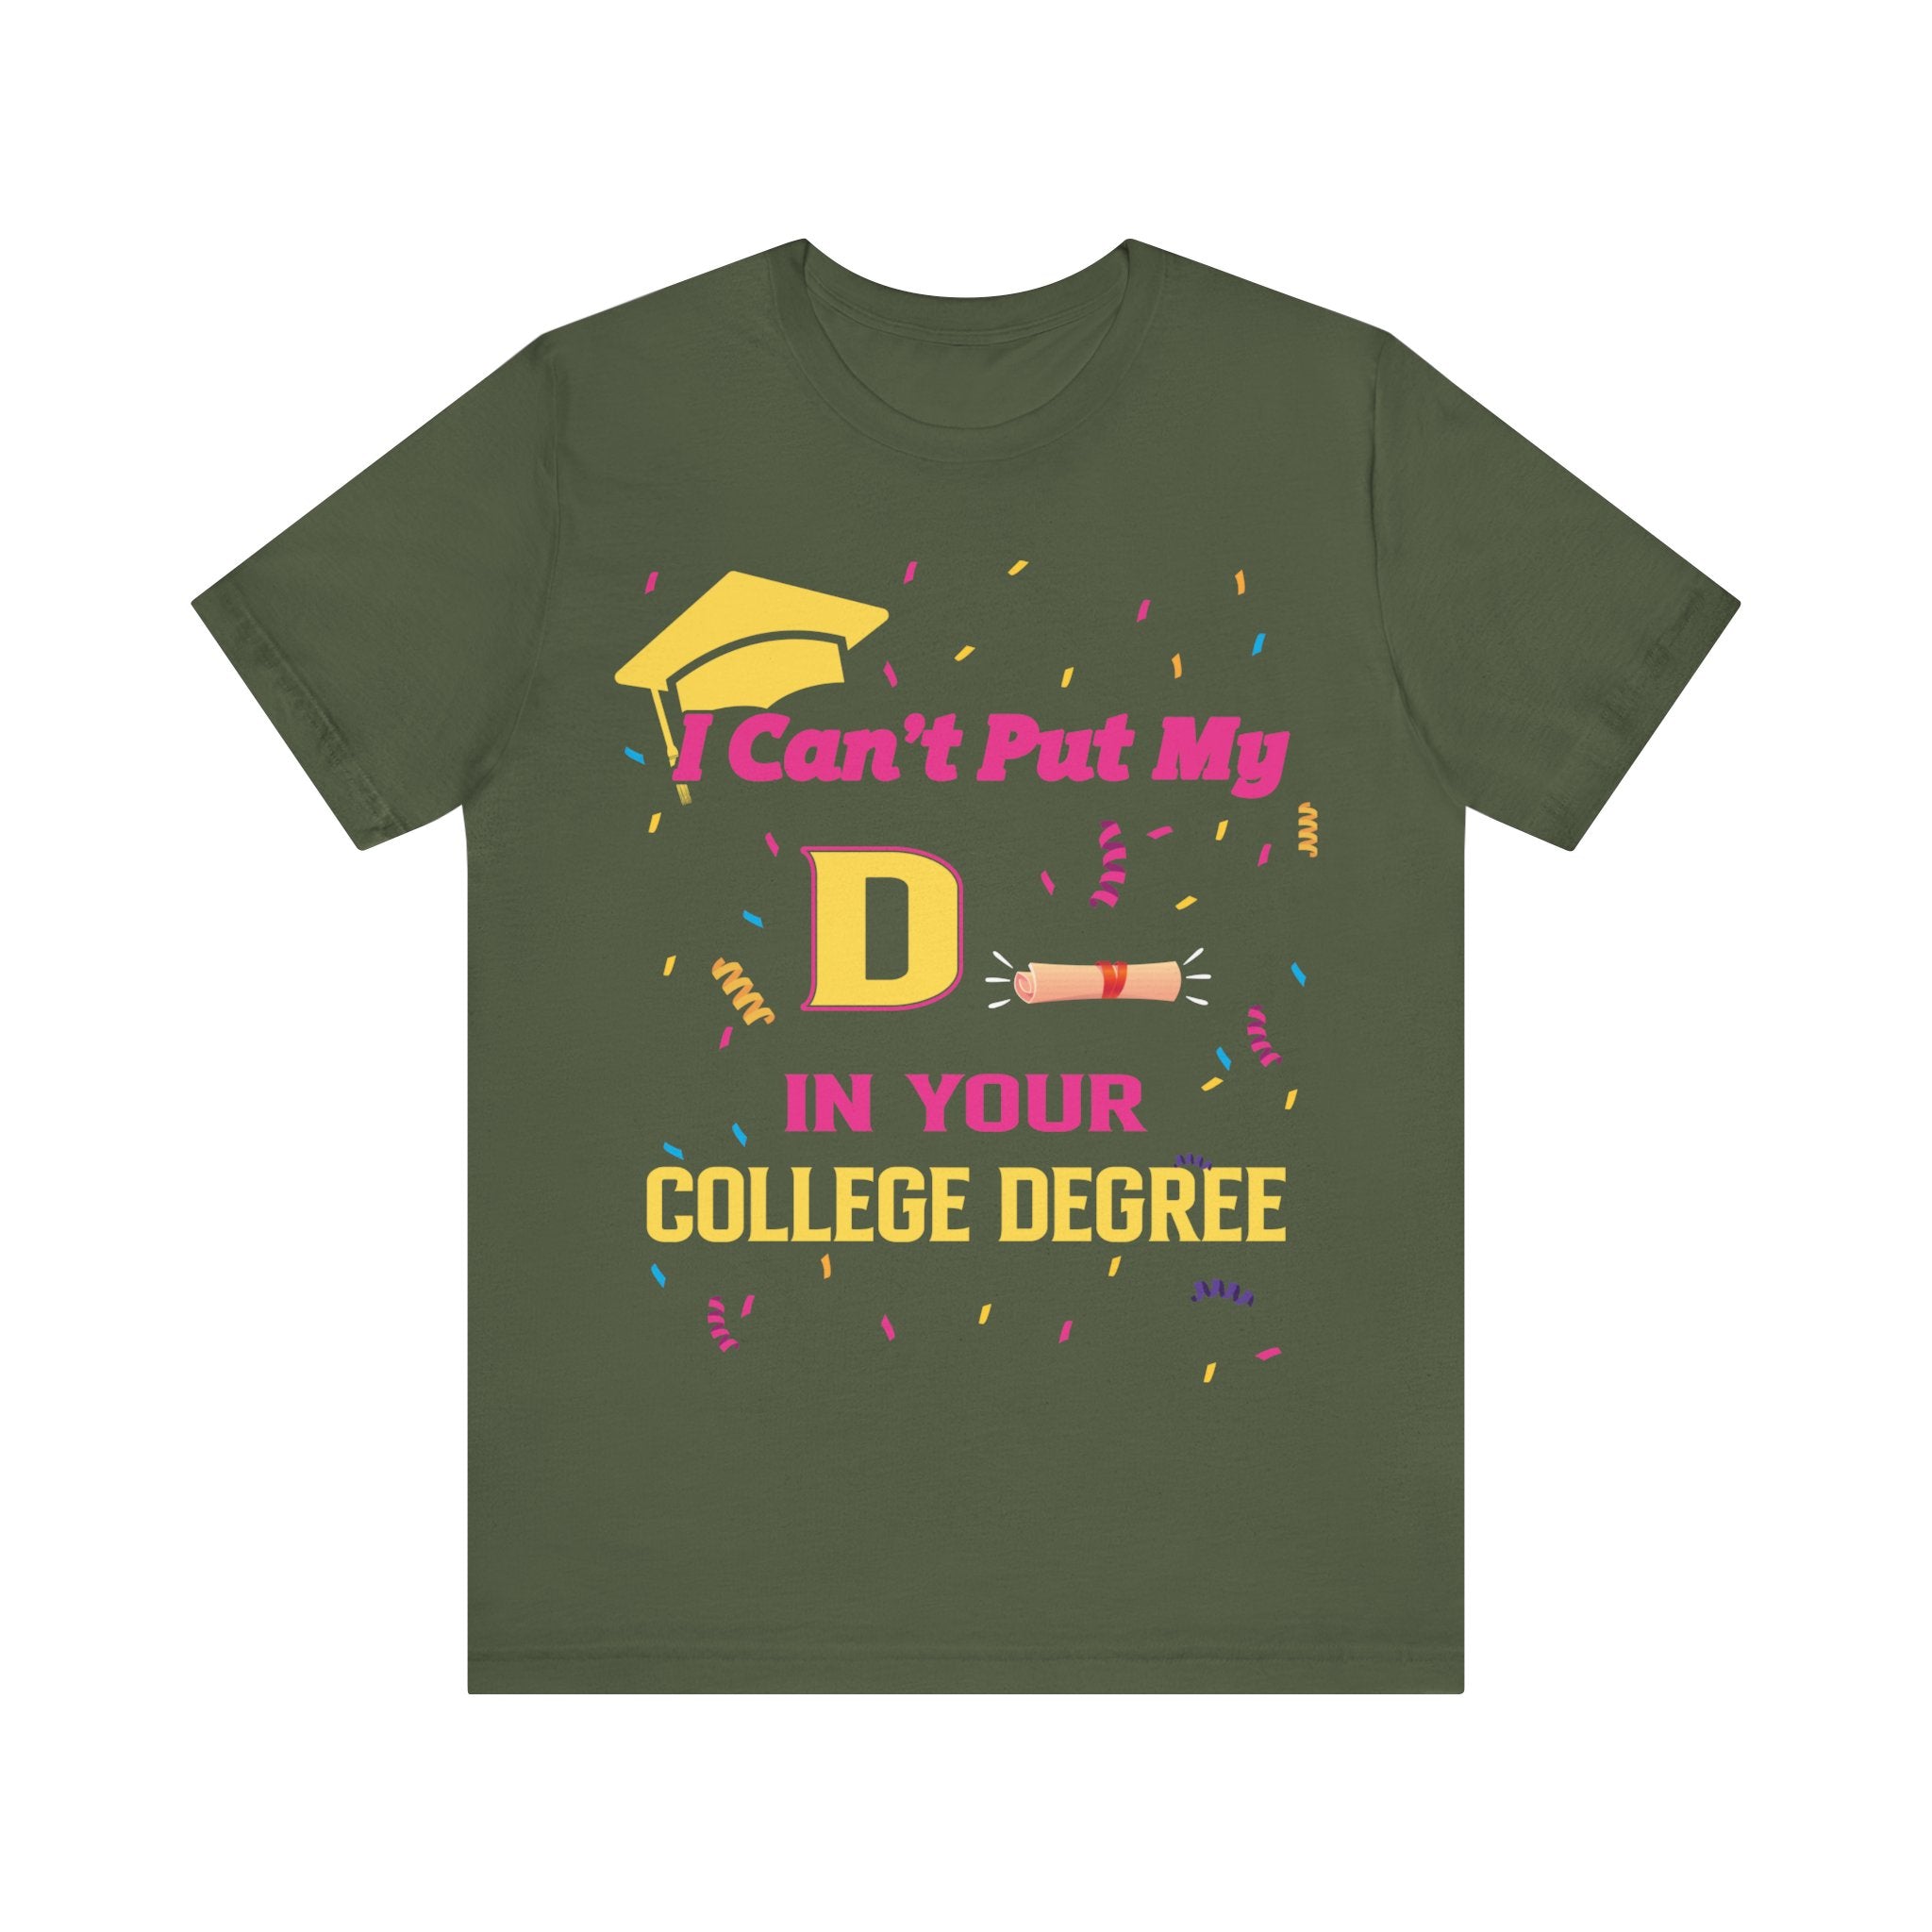 Can't Put My D - College Degree